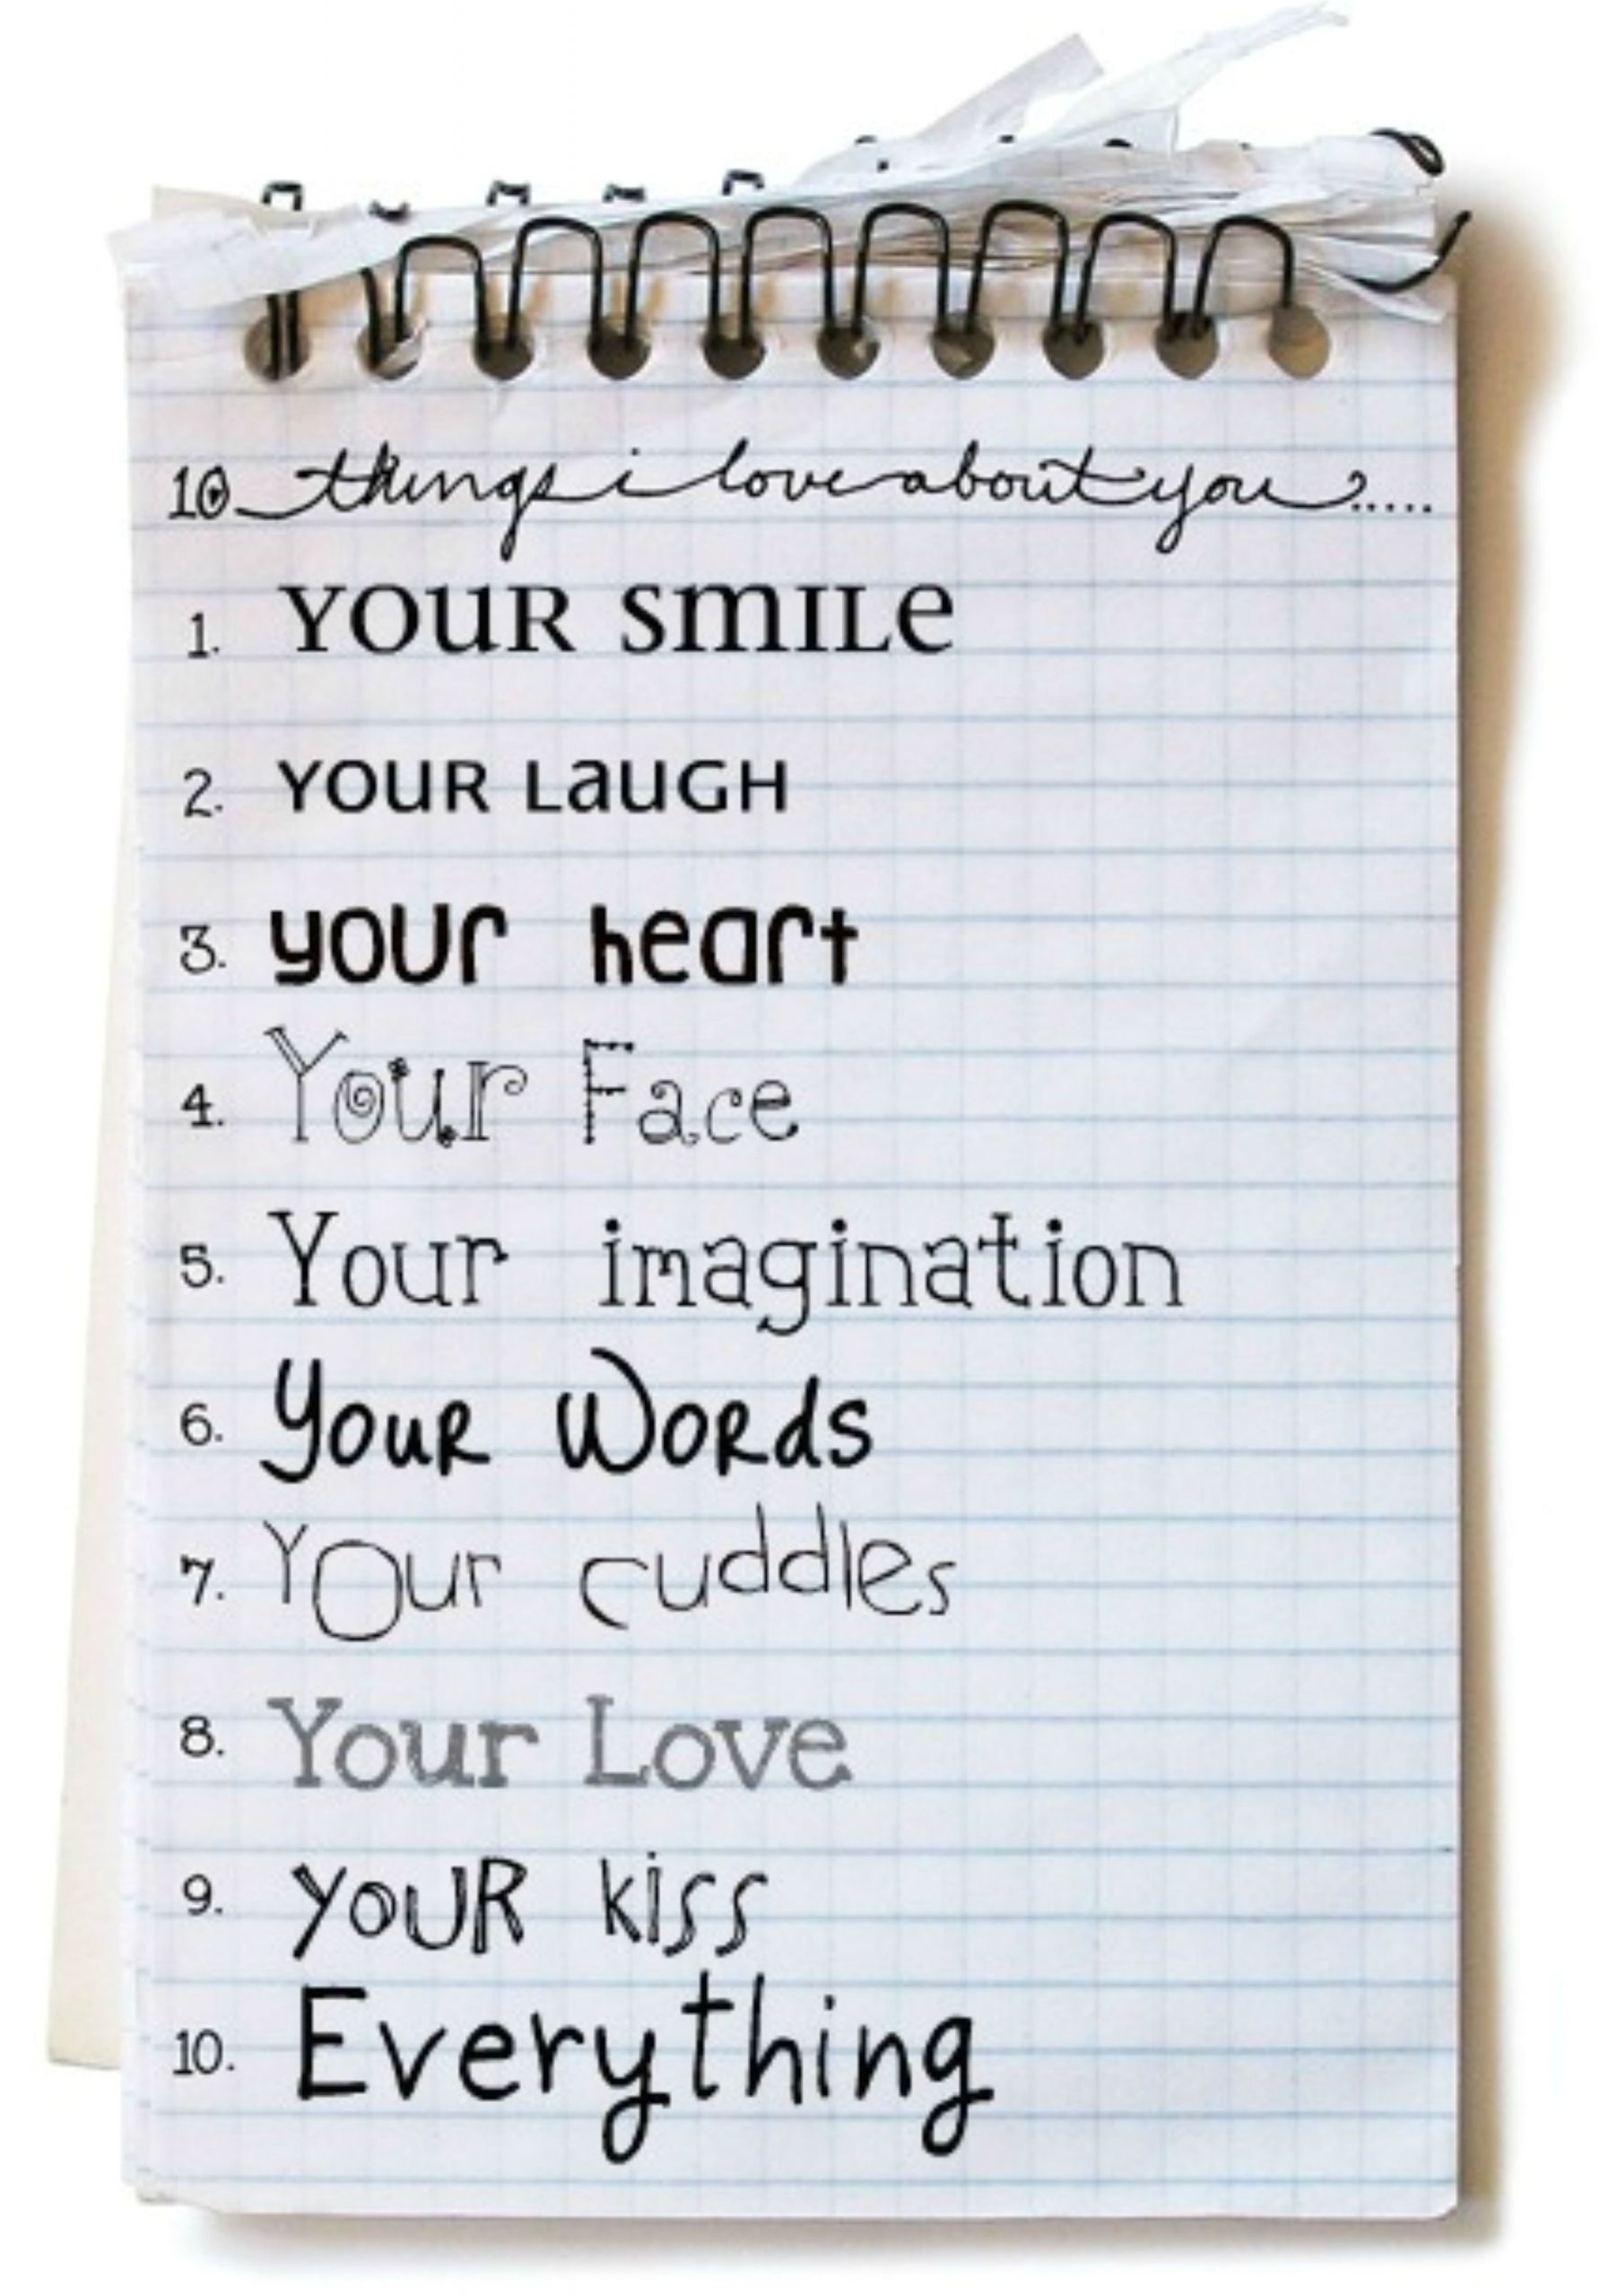 What Should I Write In A Love Card 10 Things I Love About You with Images Cards for